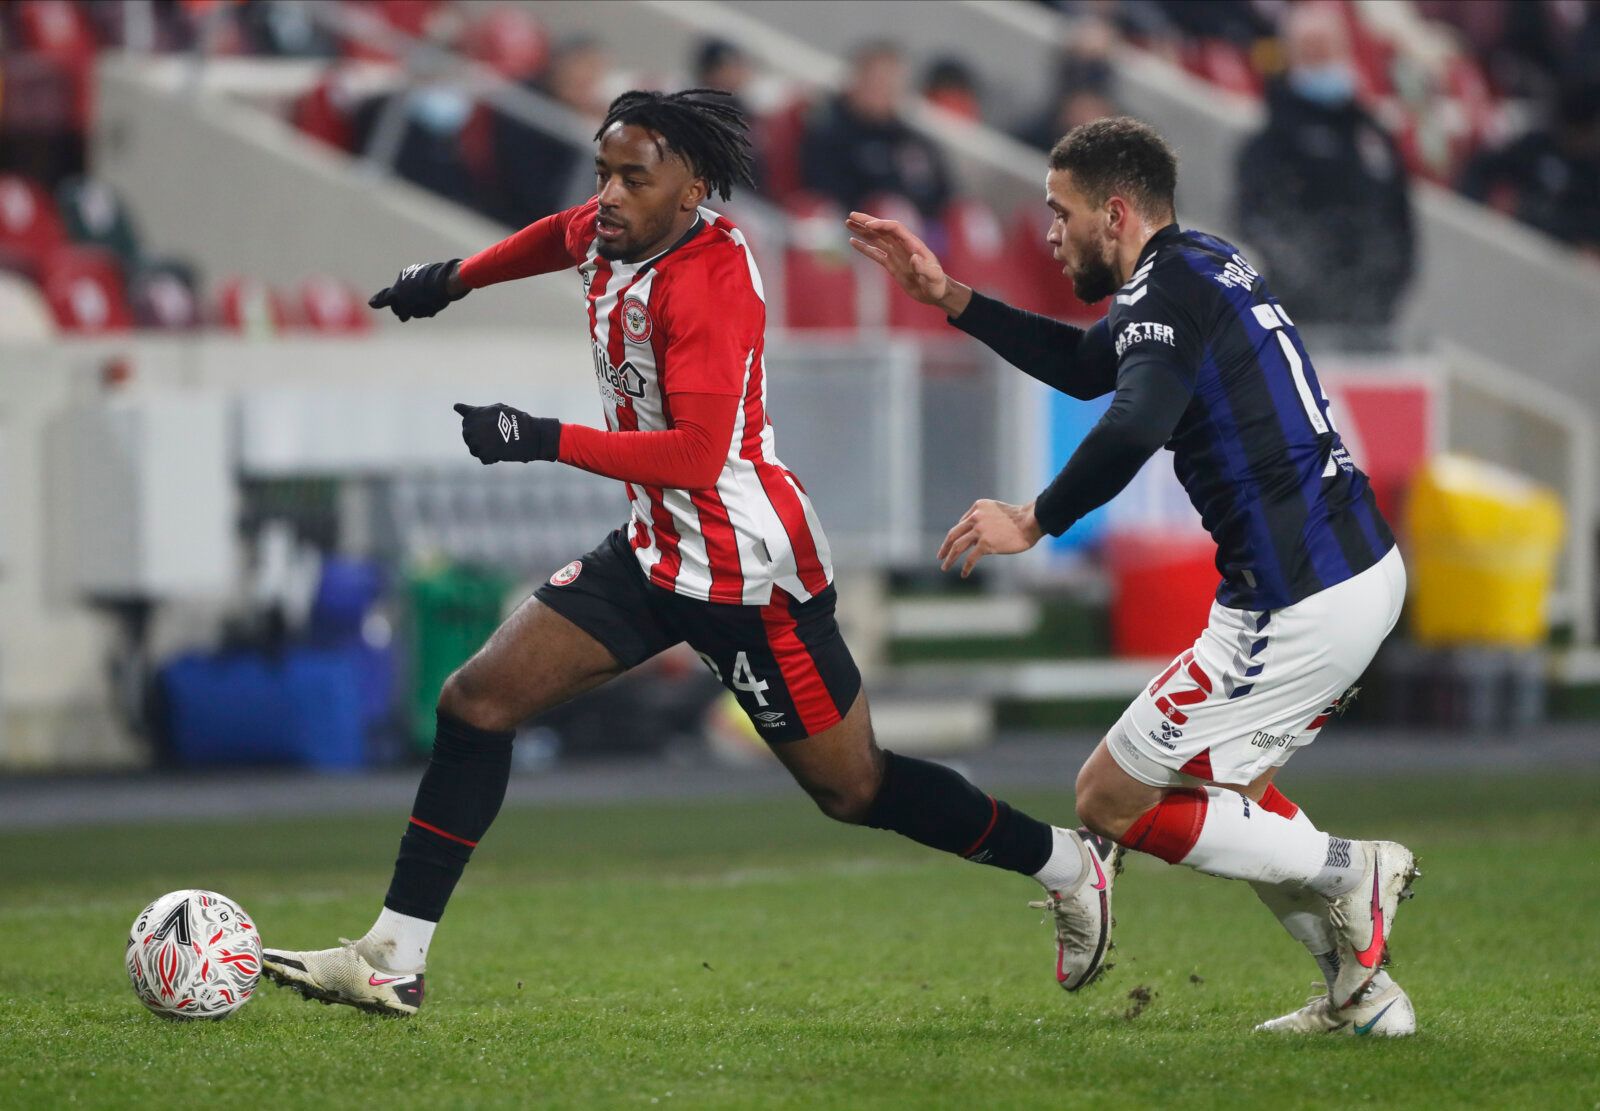 Soccer Football - FA Cup - Third Round - Brentford v Middlesbrough - Brentford Community Stadium, London, Britain - January 9, 2021  Brentford's Tariqe Fosu in action with Middlesbrough's Marcus Browne Action Images via Reuters/Matthew Childs